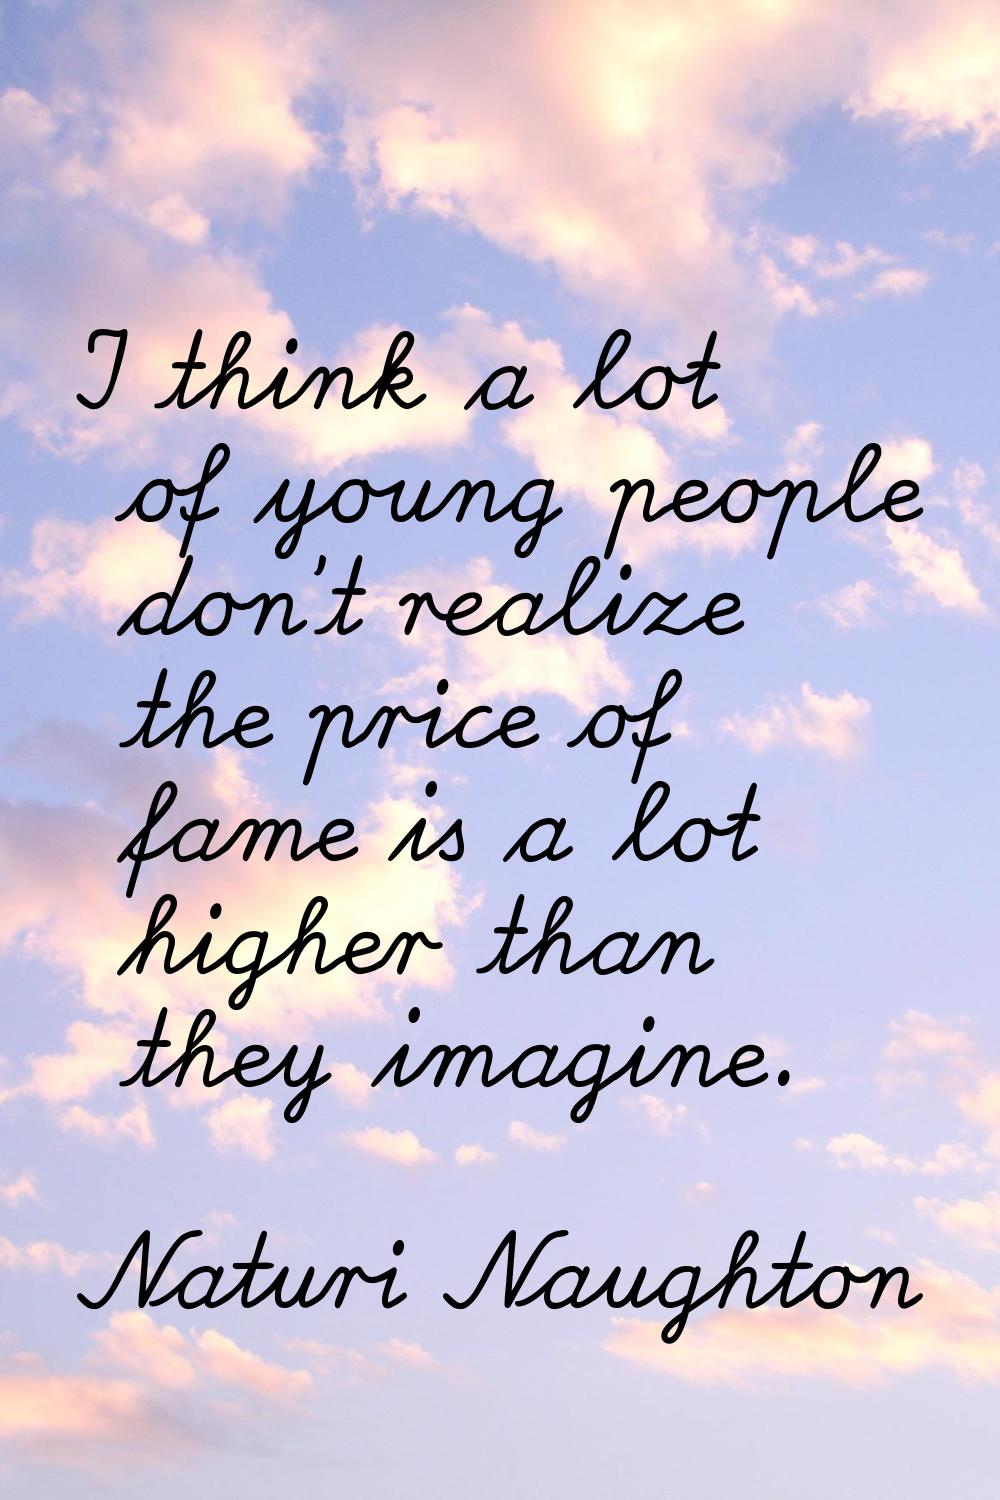 I think a lot of young people don't realize the price of fame is a lot higher than they imagine.